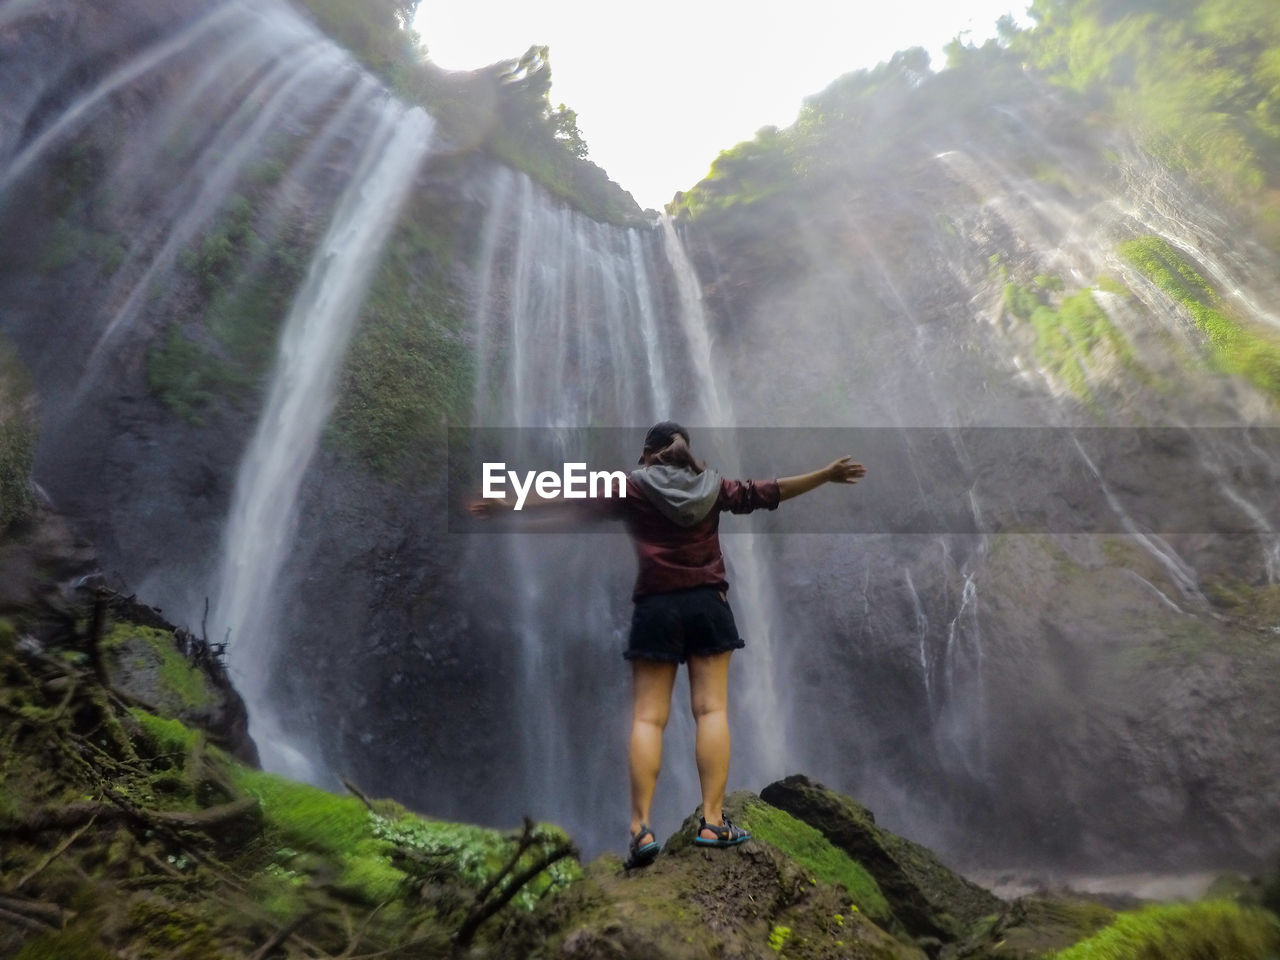 Blurred motion of woman outstretching in front of waterfall